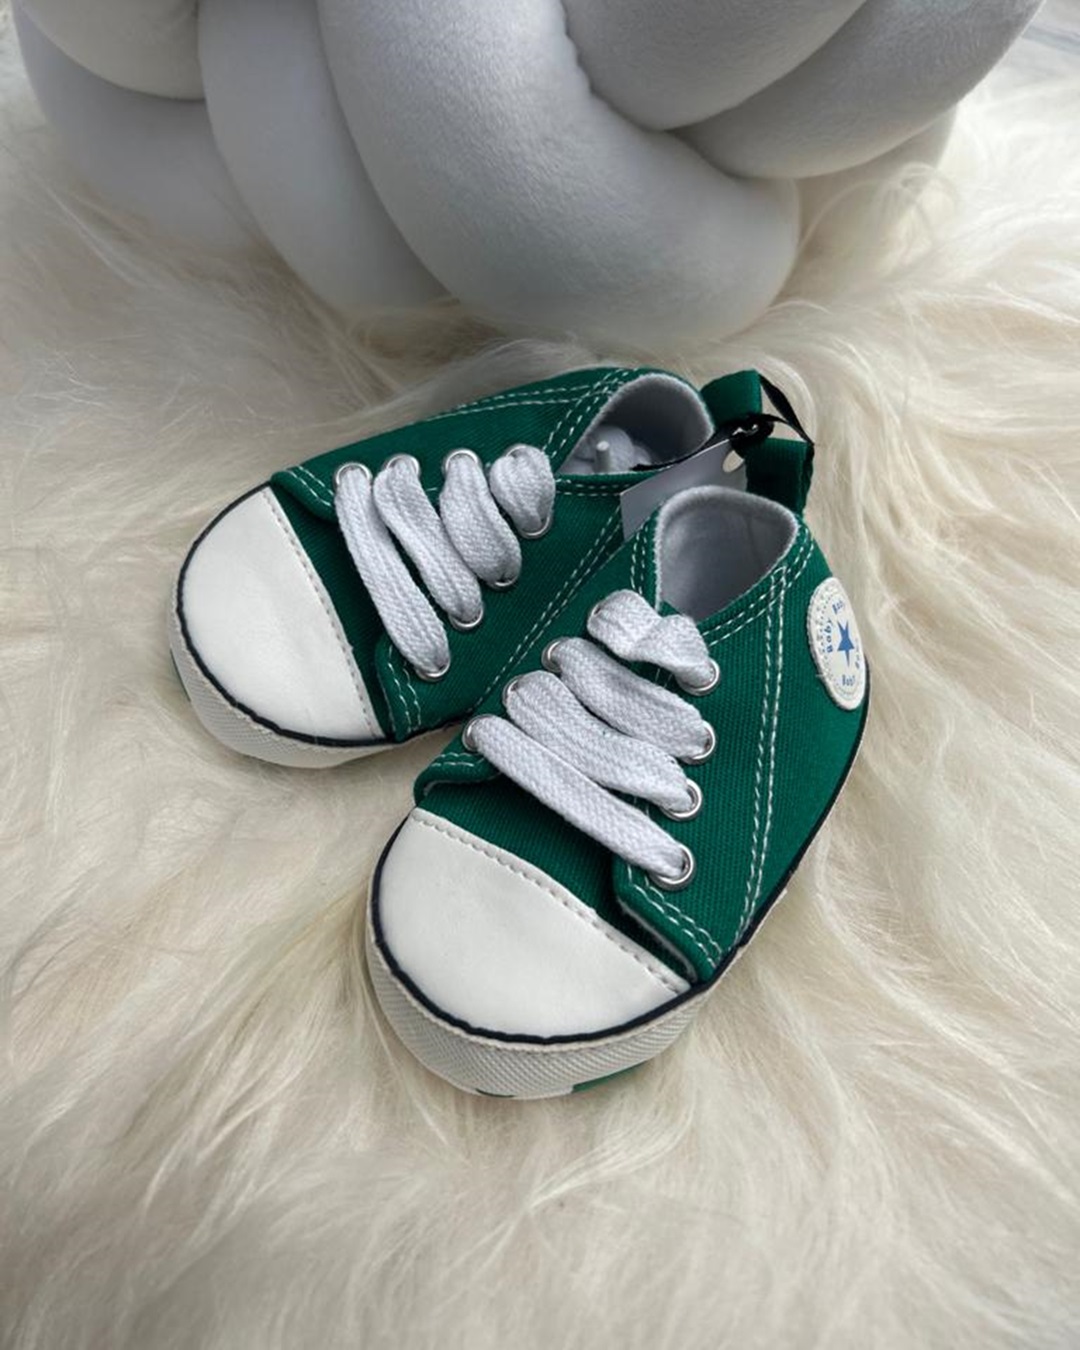 Baby canvas shoes dark green with white laces